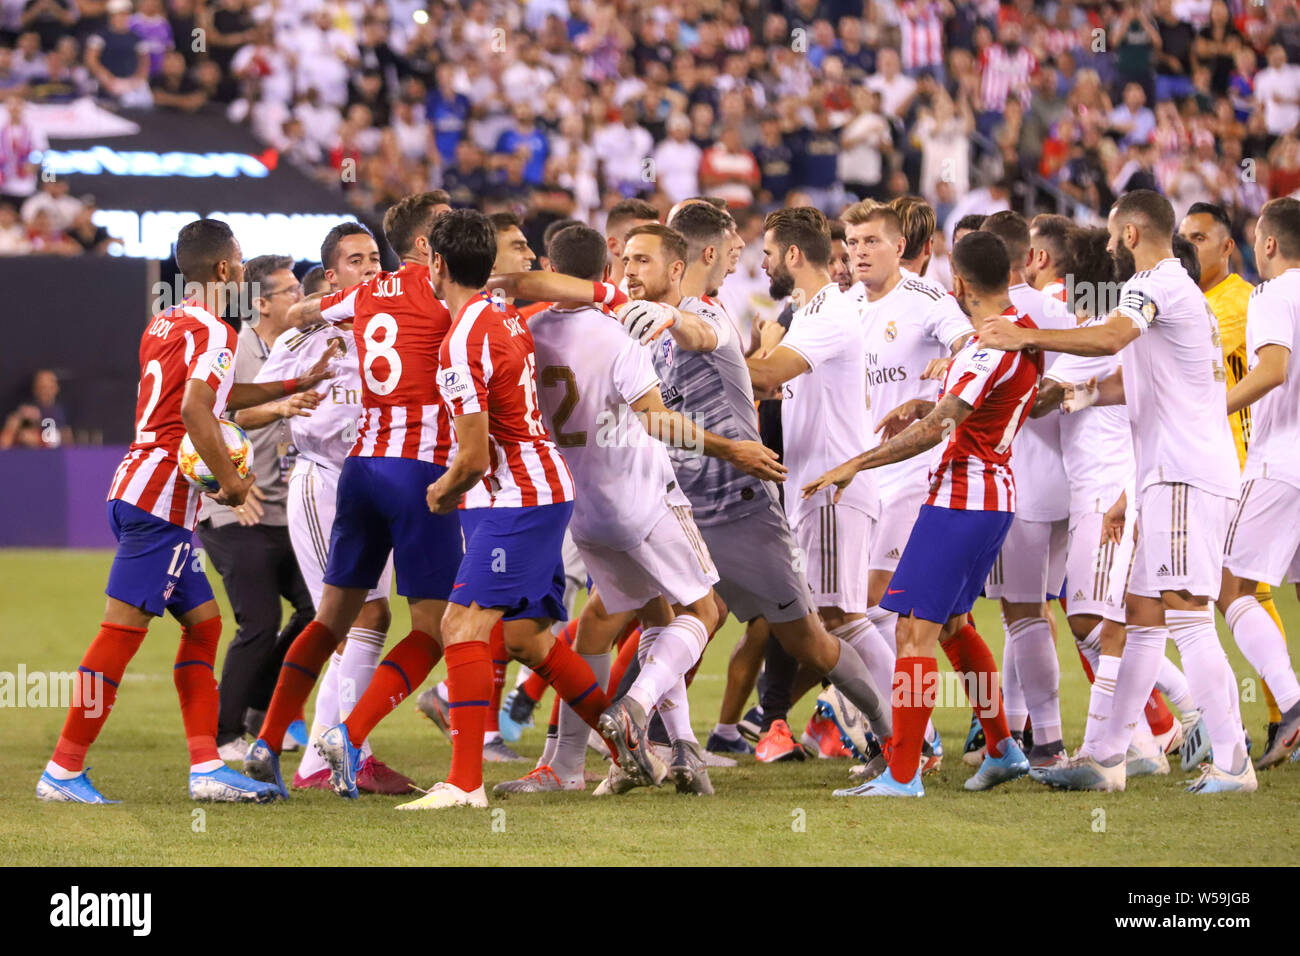 July 26, 2019, East Runtherford, New Jersey, United States: Players are  trying to separate the fight between Daniel Carvajal of Real Madrid and  Diego Costa of Atletico Madrid in the International Champions